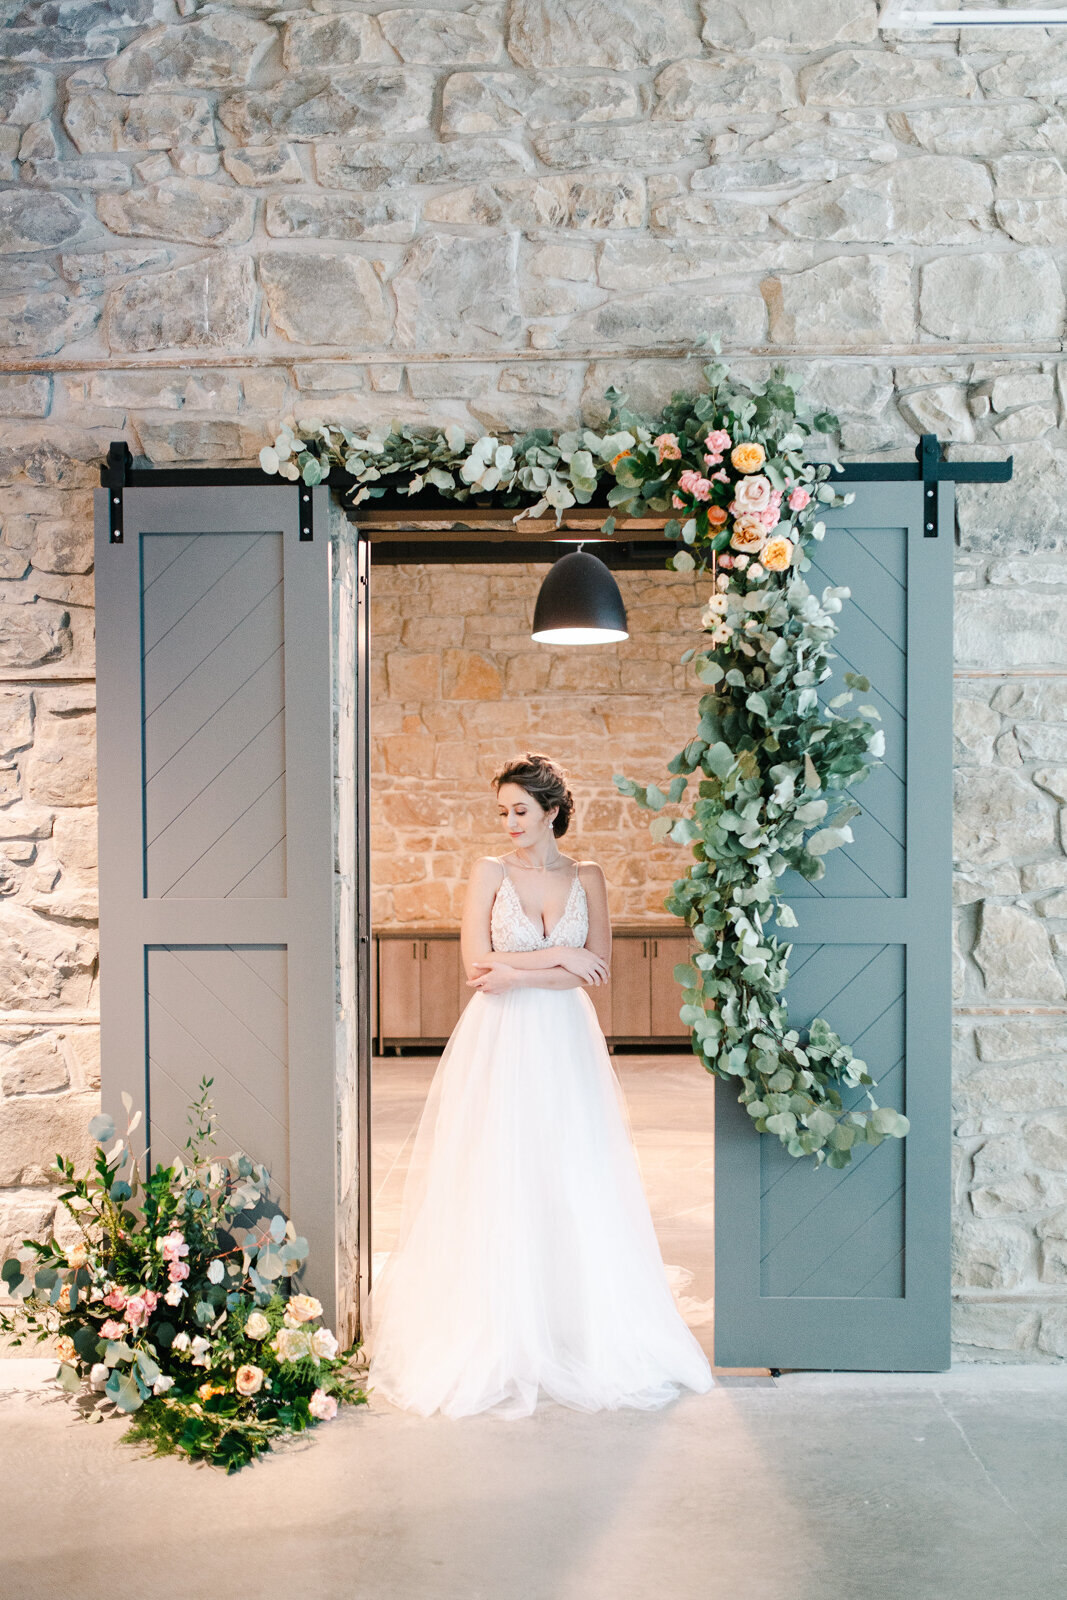 Stunning bridal portrait styled by CNC Event Design, modern and elegant wedding planner based in Calgary, Alberta.  Featured on the Brontë Bride Vendor Guide.